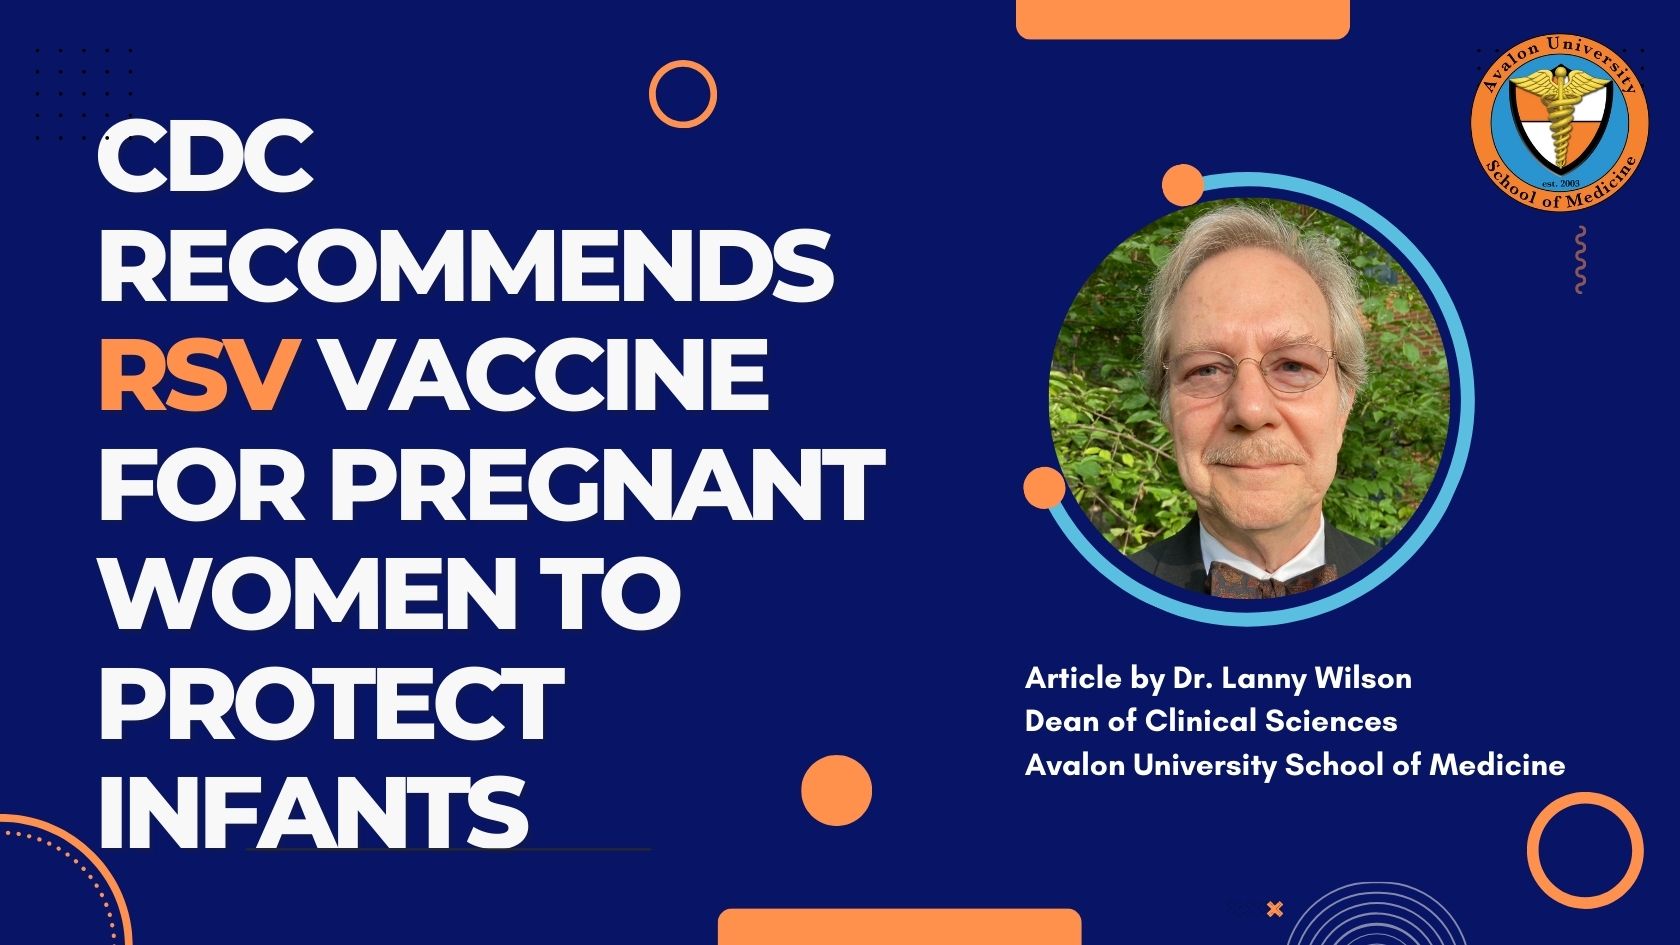 CDC Recommends RSV Vaccine for Pregnant Women to Protect Infants